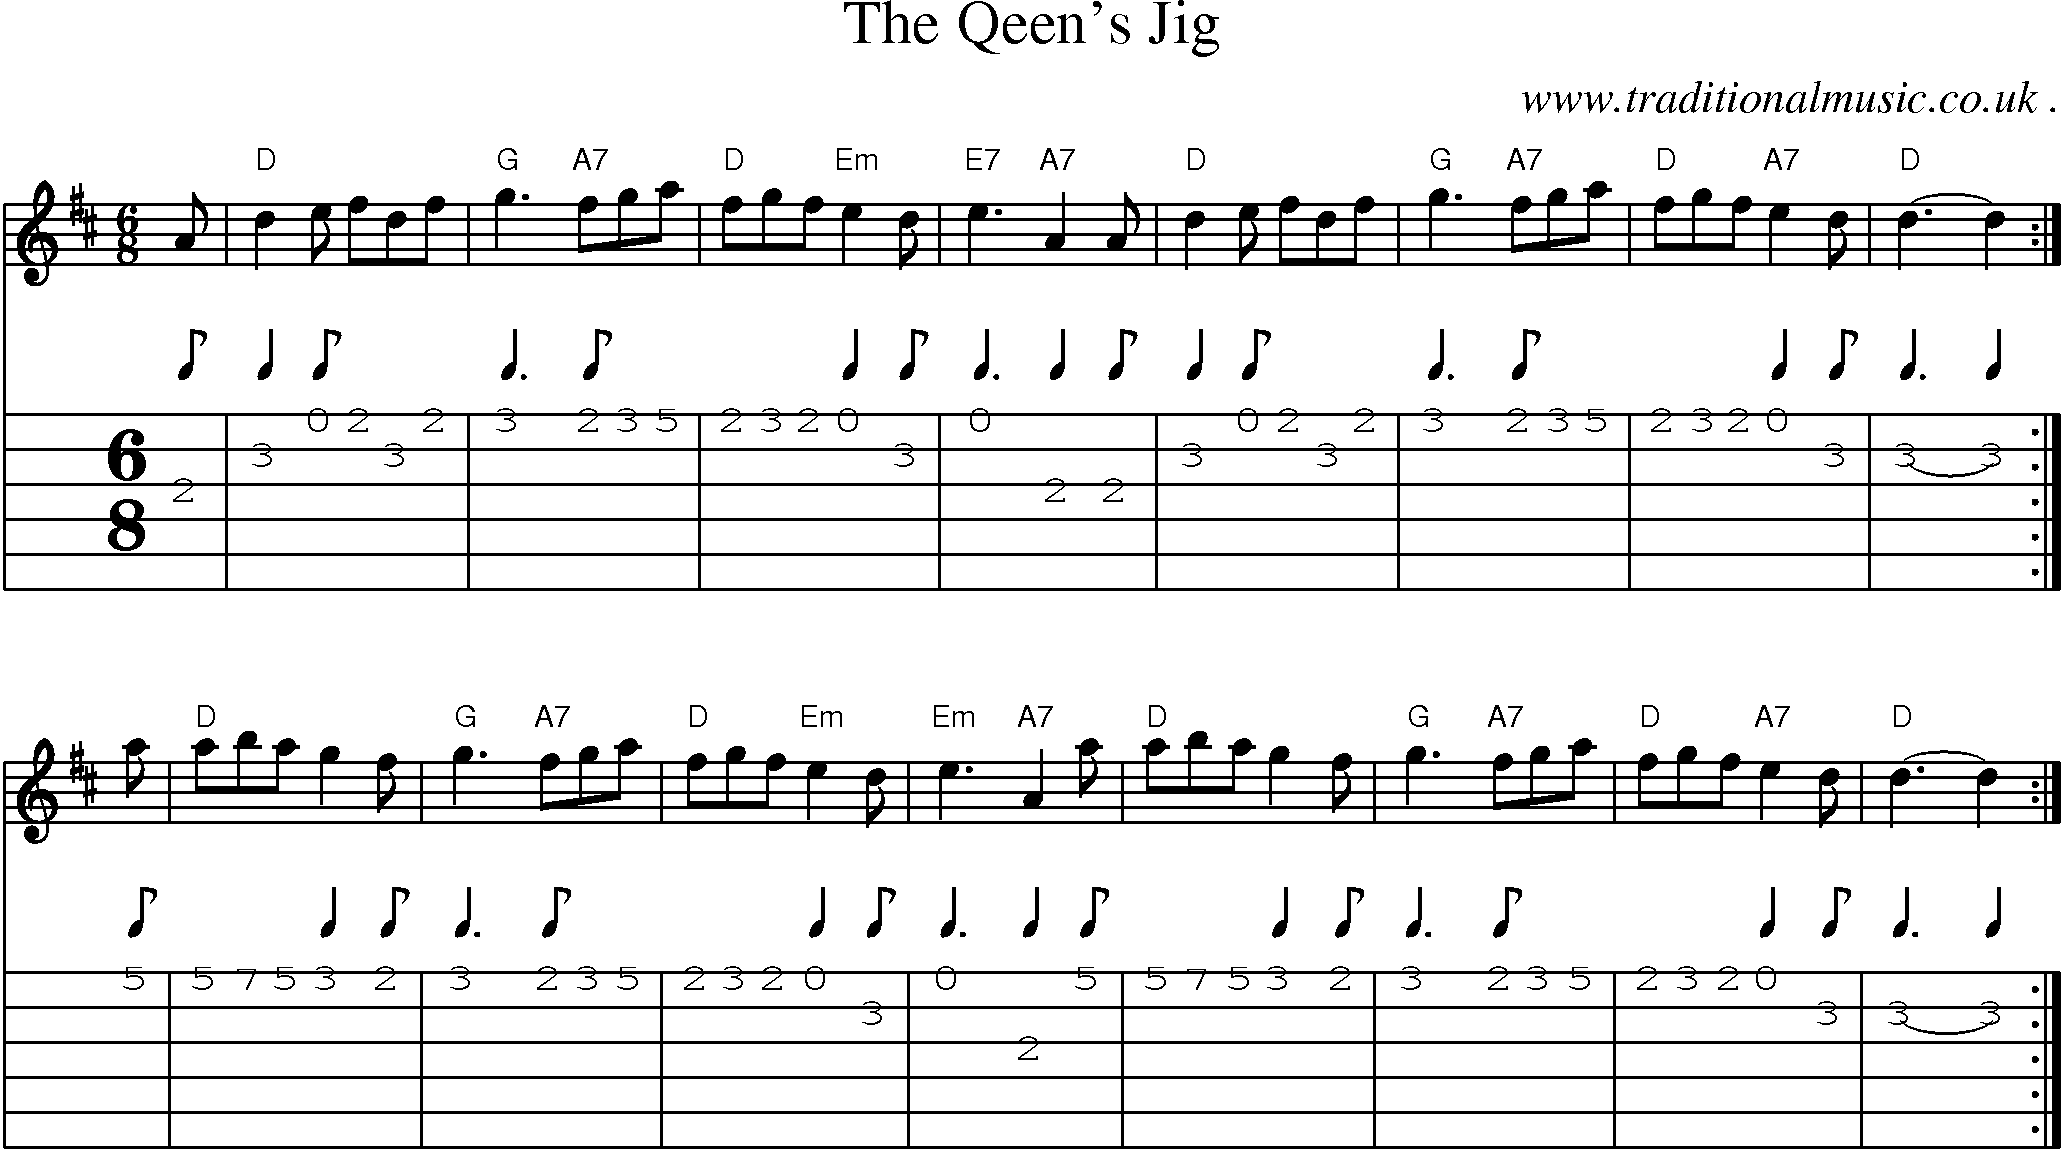 Sheet-Music and Guitar Tabs for The Qeens Jig